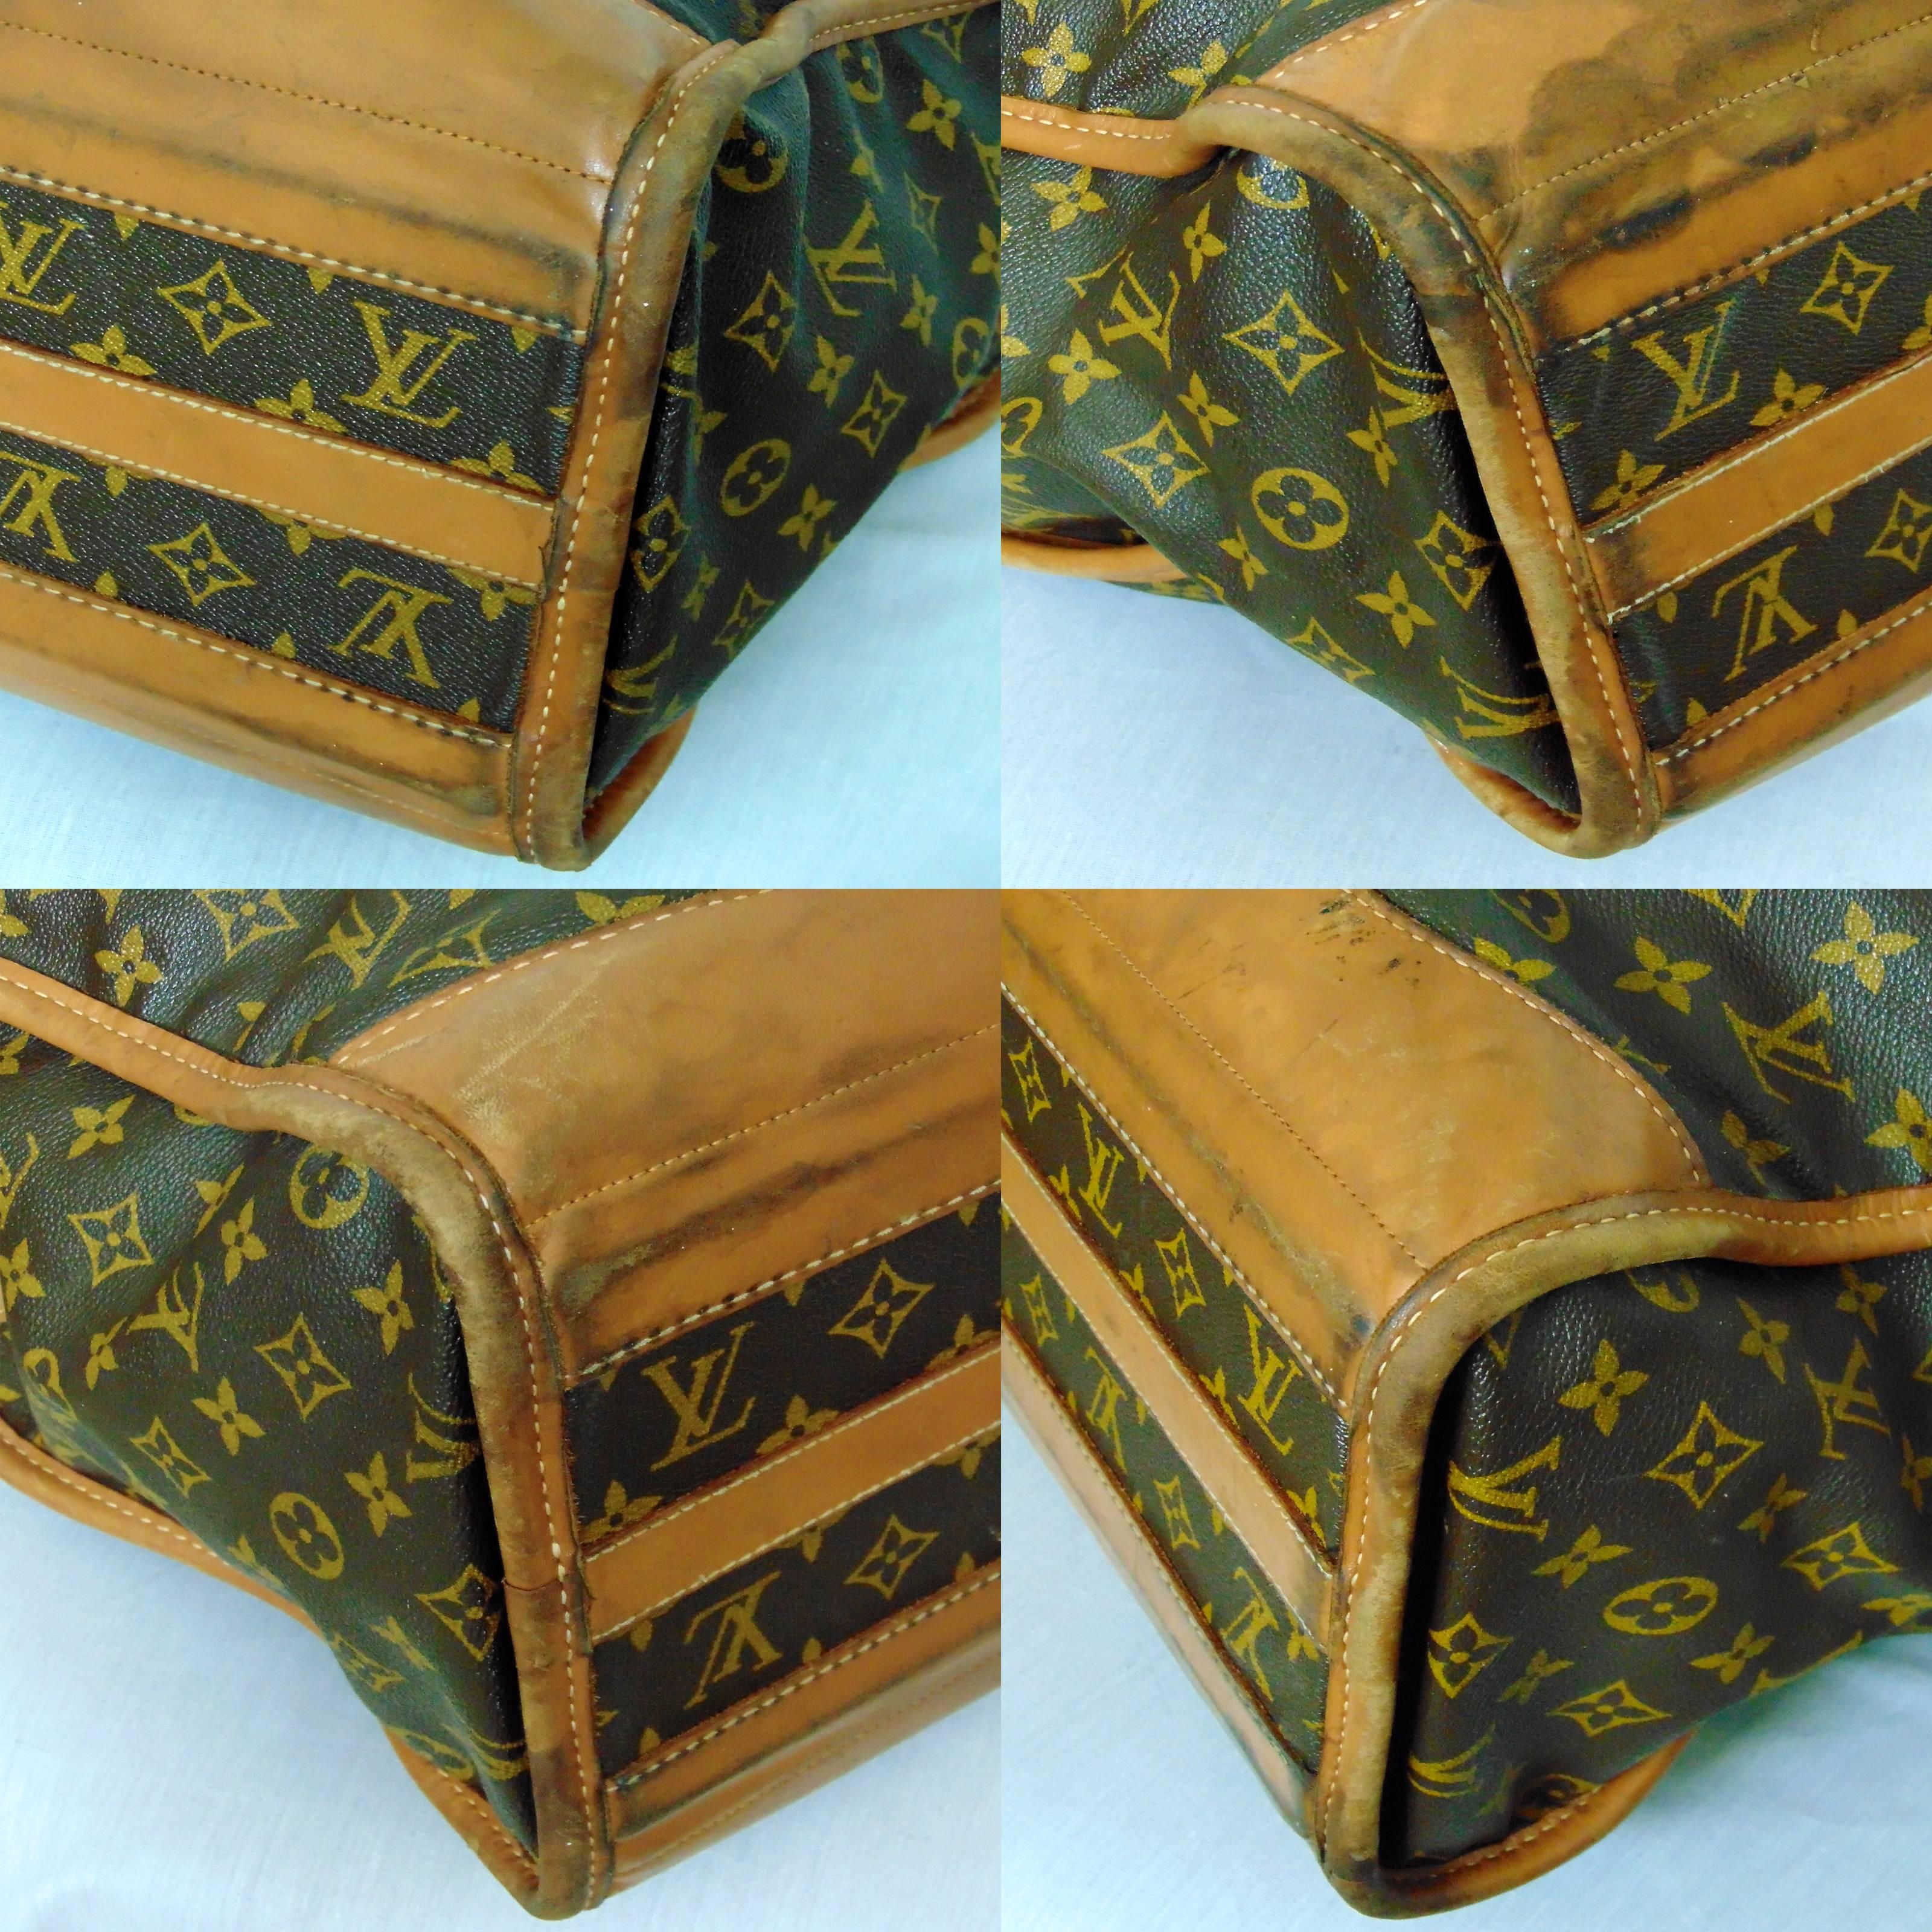 Women's Louis Vuitton by The French Company Carry On Travel Bag Monogram Canvas 1970s 